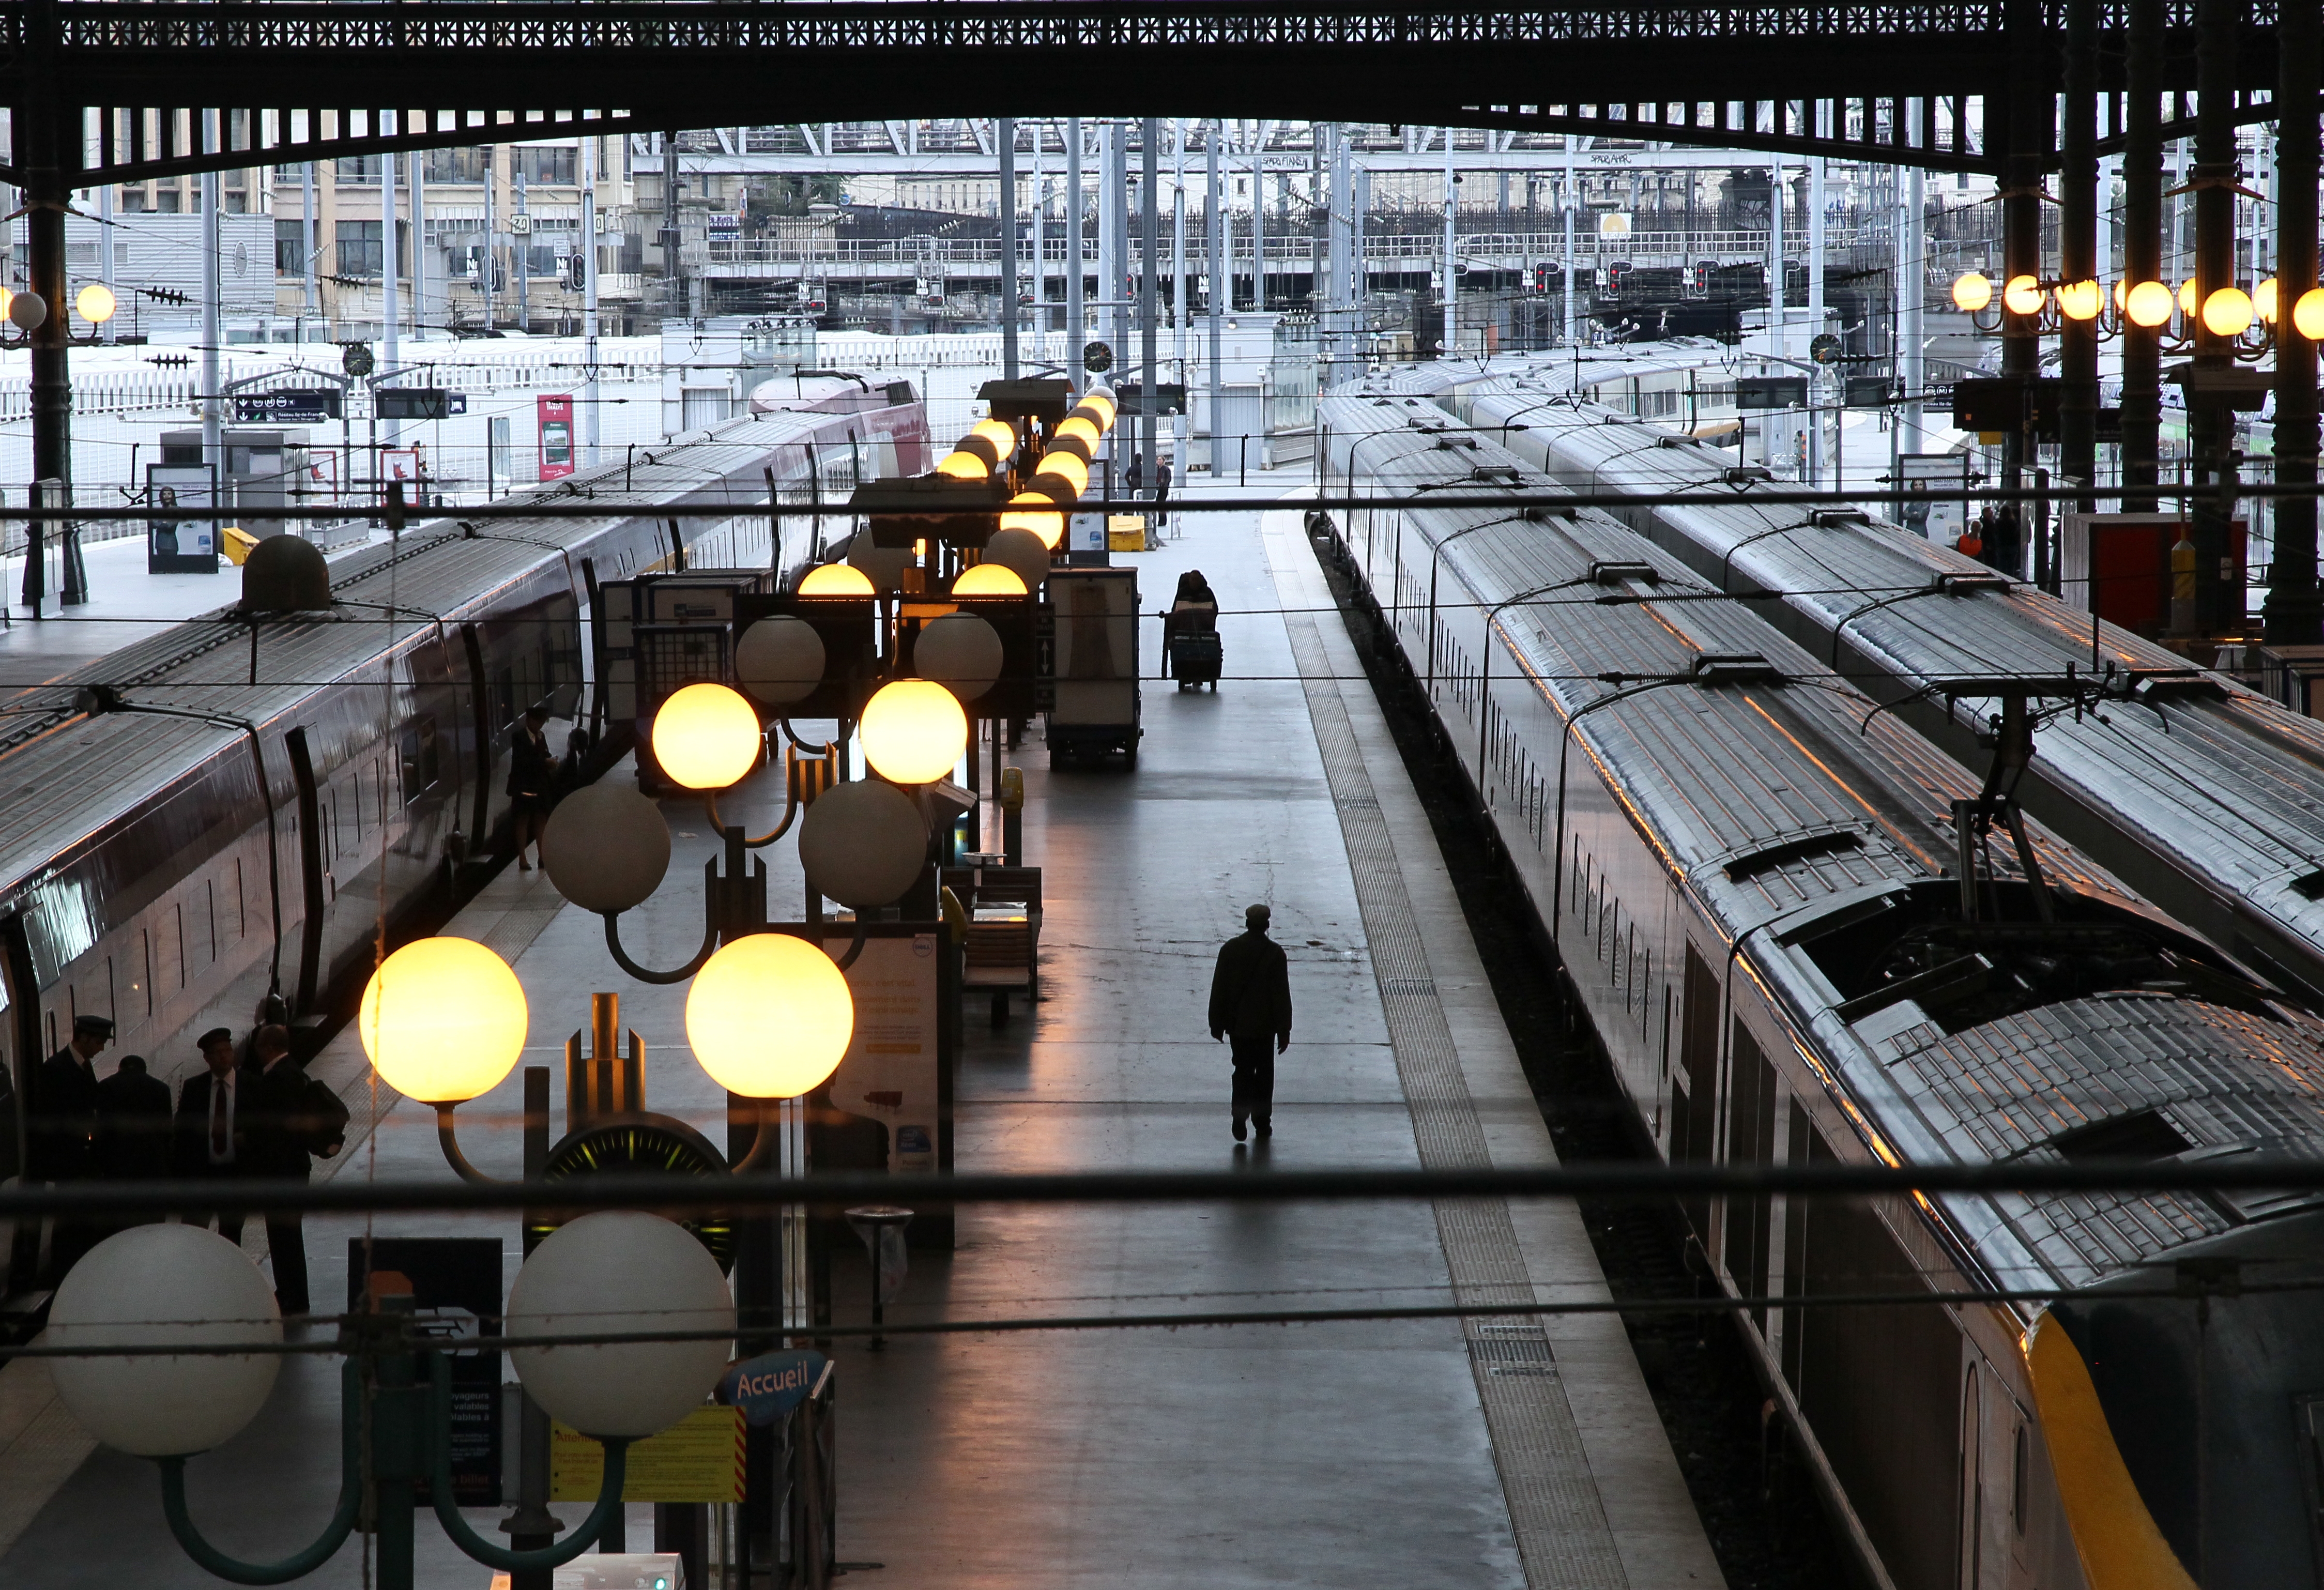 Underground Railway in List of France stations located How to